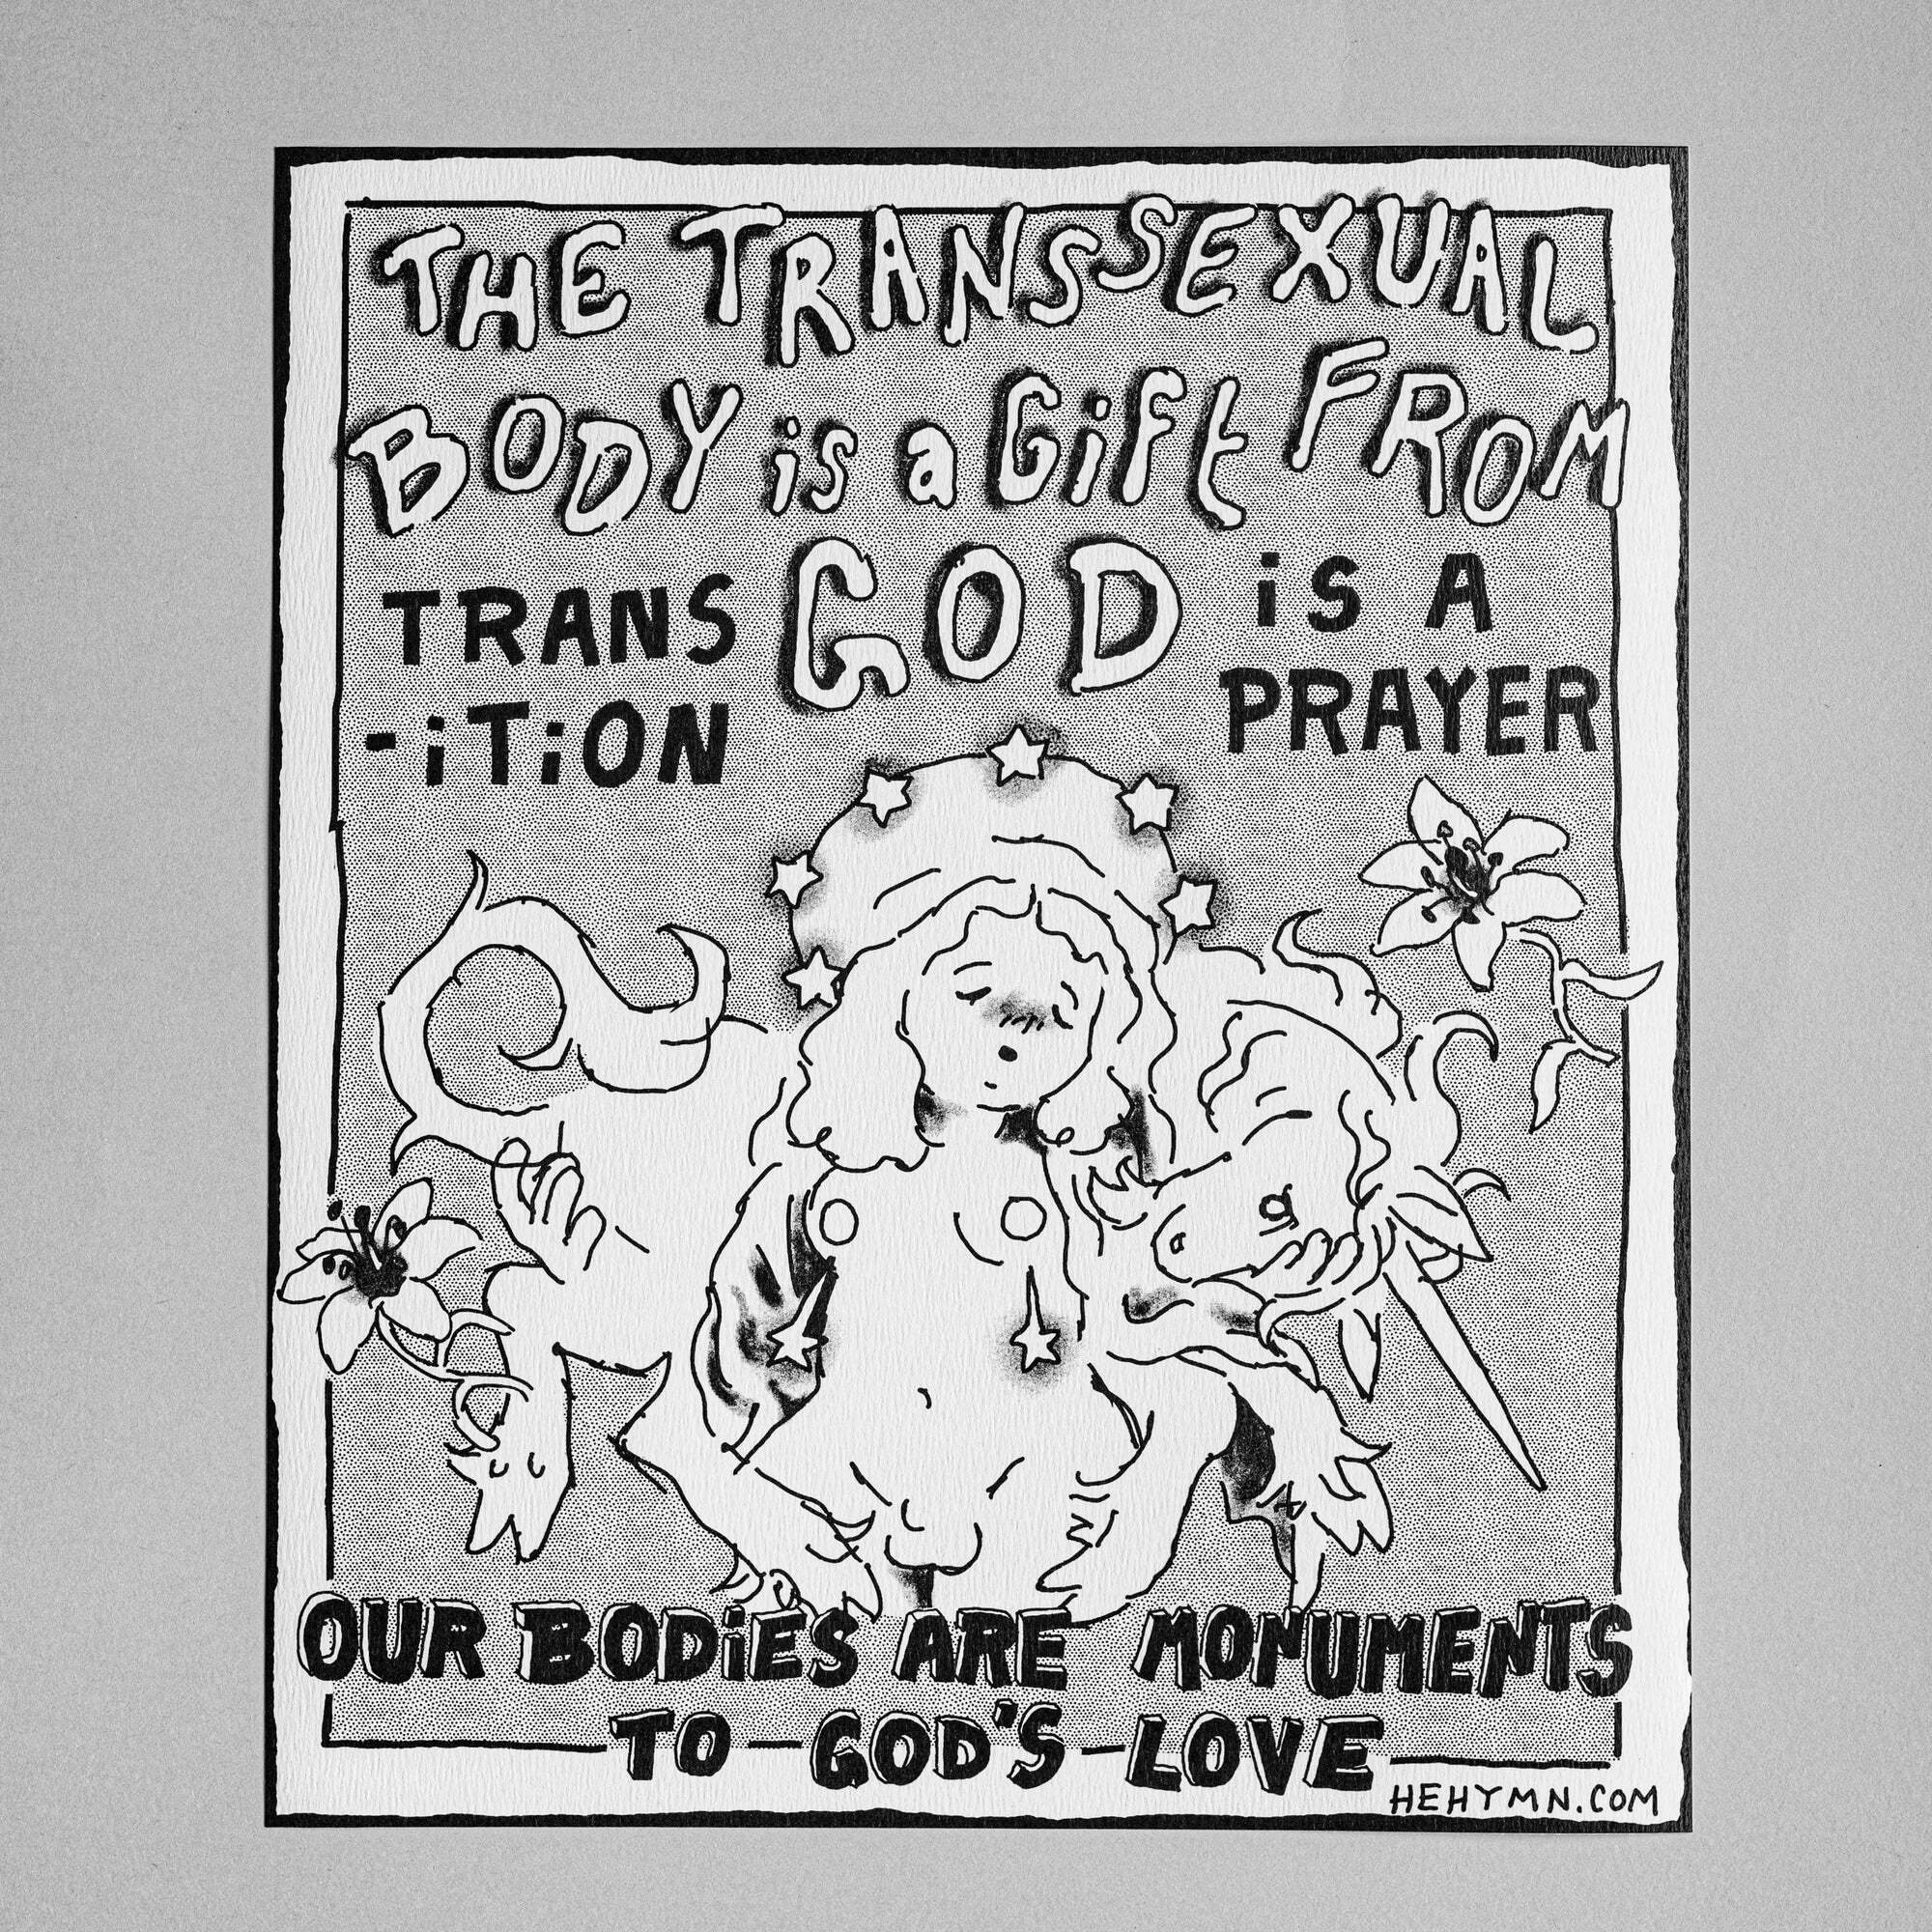 the transsexual body is a gift from God. transition is a prayer. our bodies are monuments to God's love.